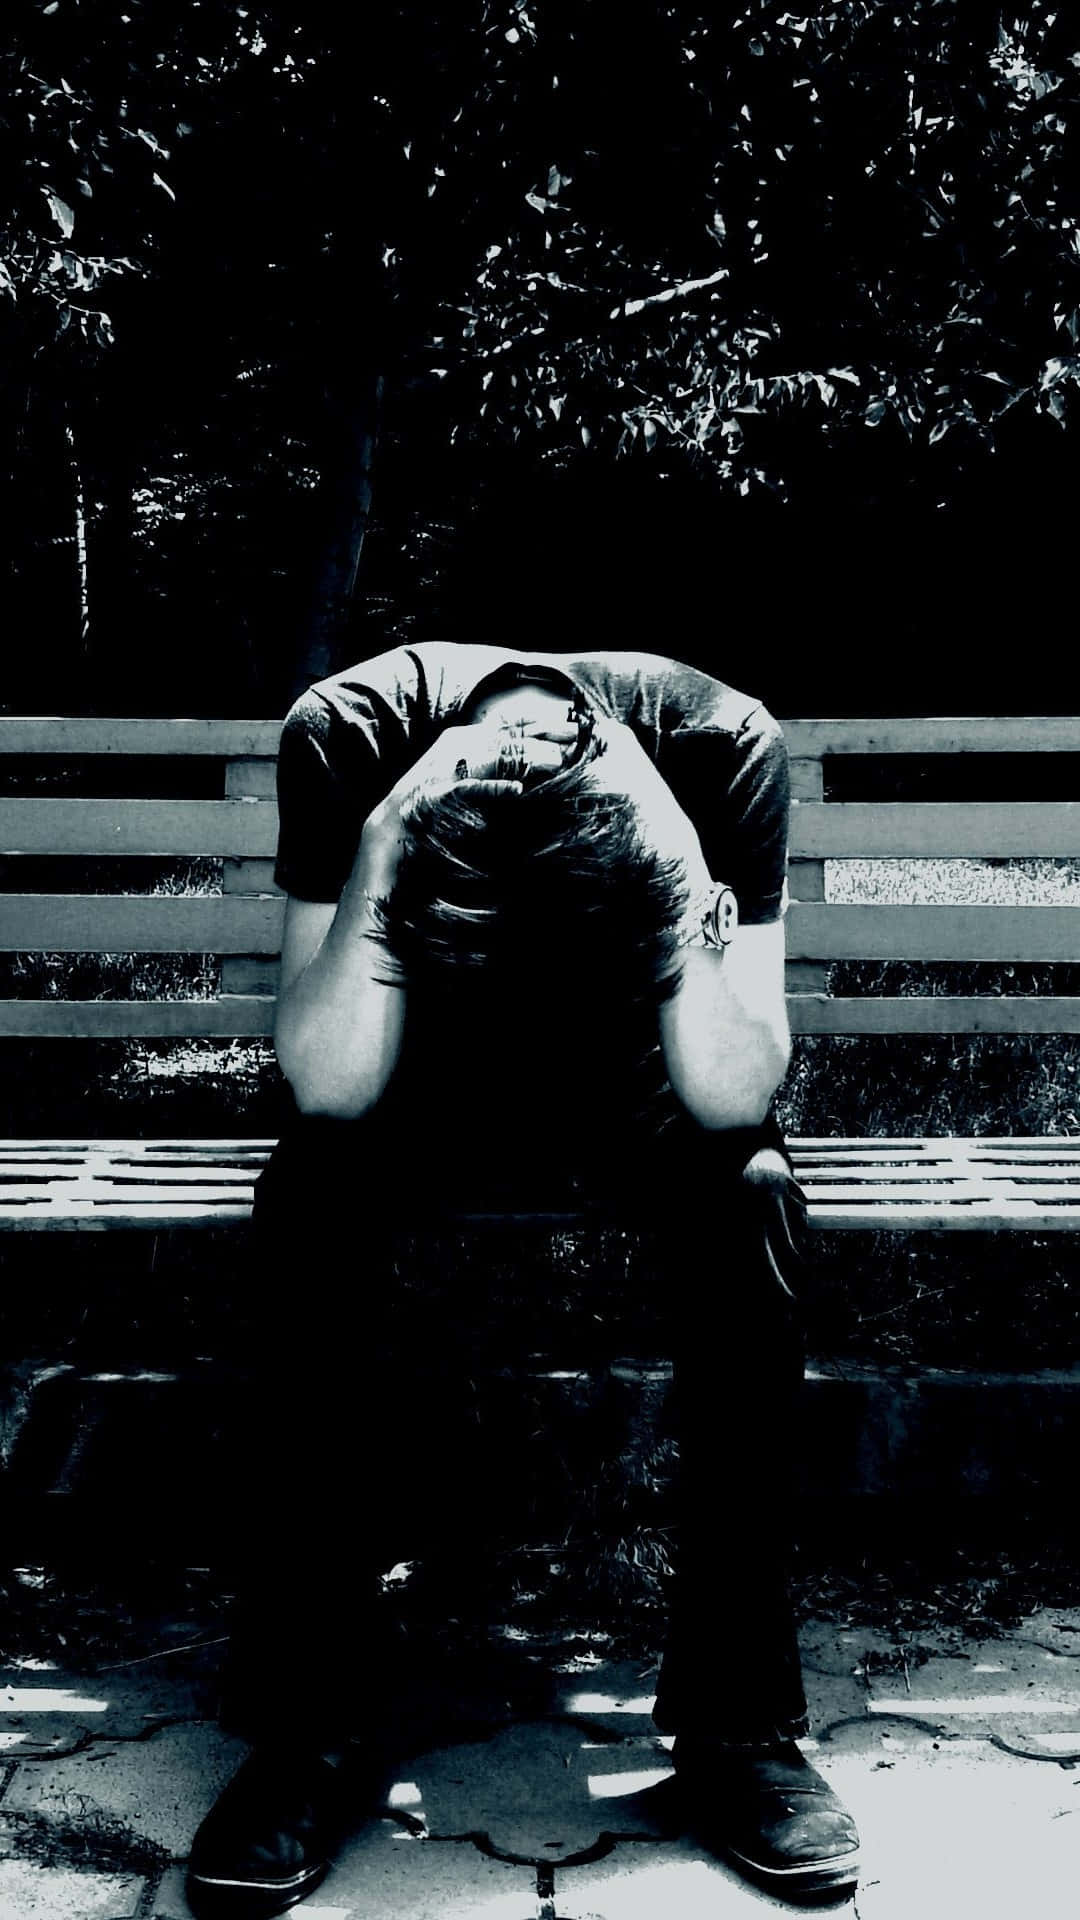 Man In Bench With Sadness Wallpaper